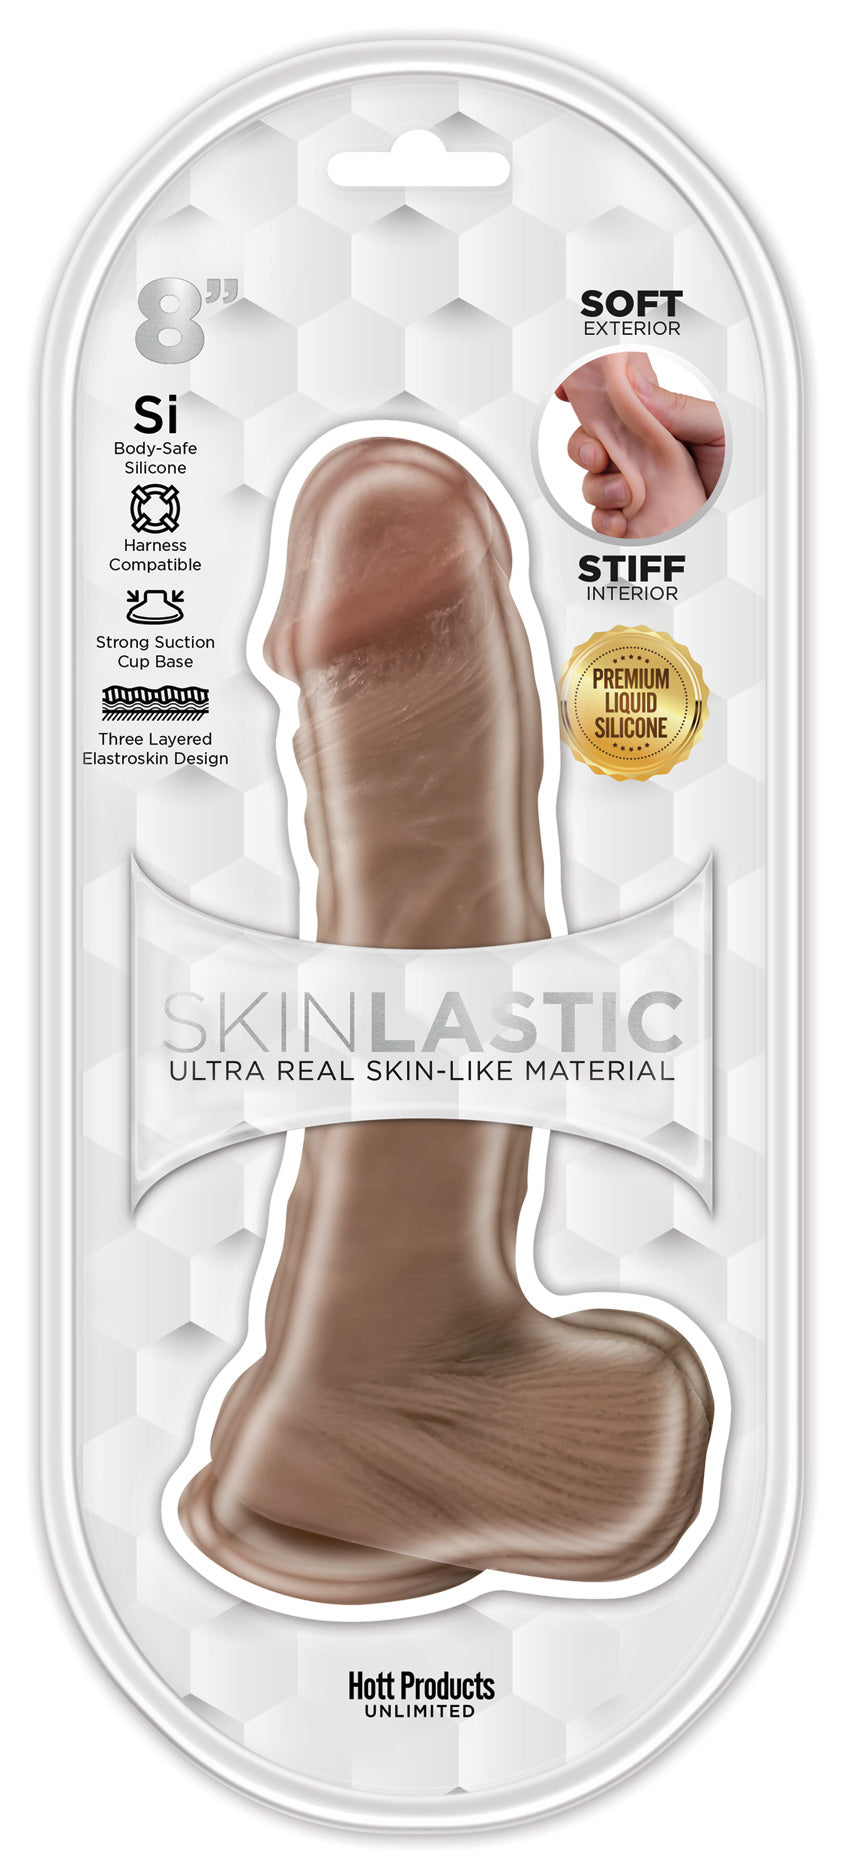 Skinsations - Skinlastic - Sliding Skin Dildo - With Suction Base 8 Inch